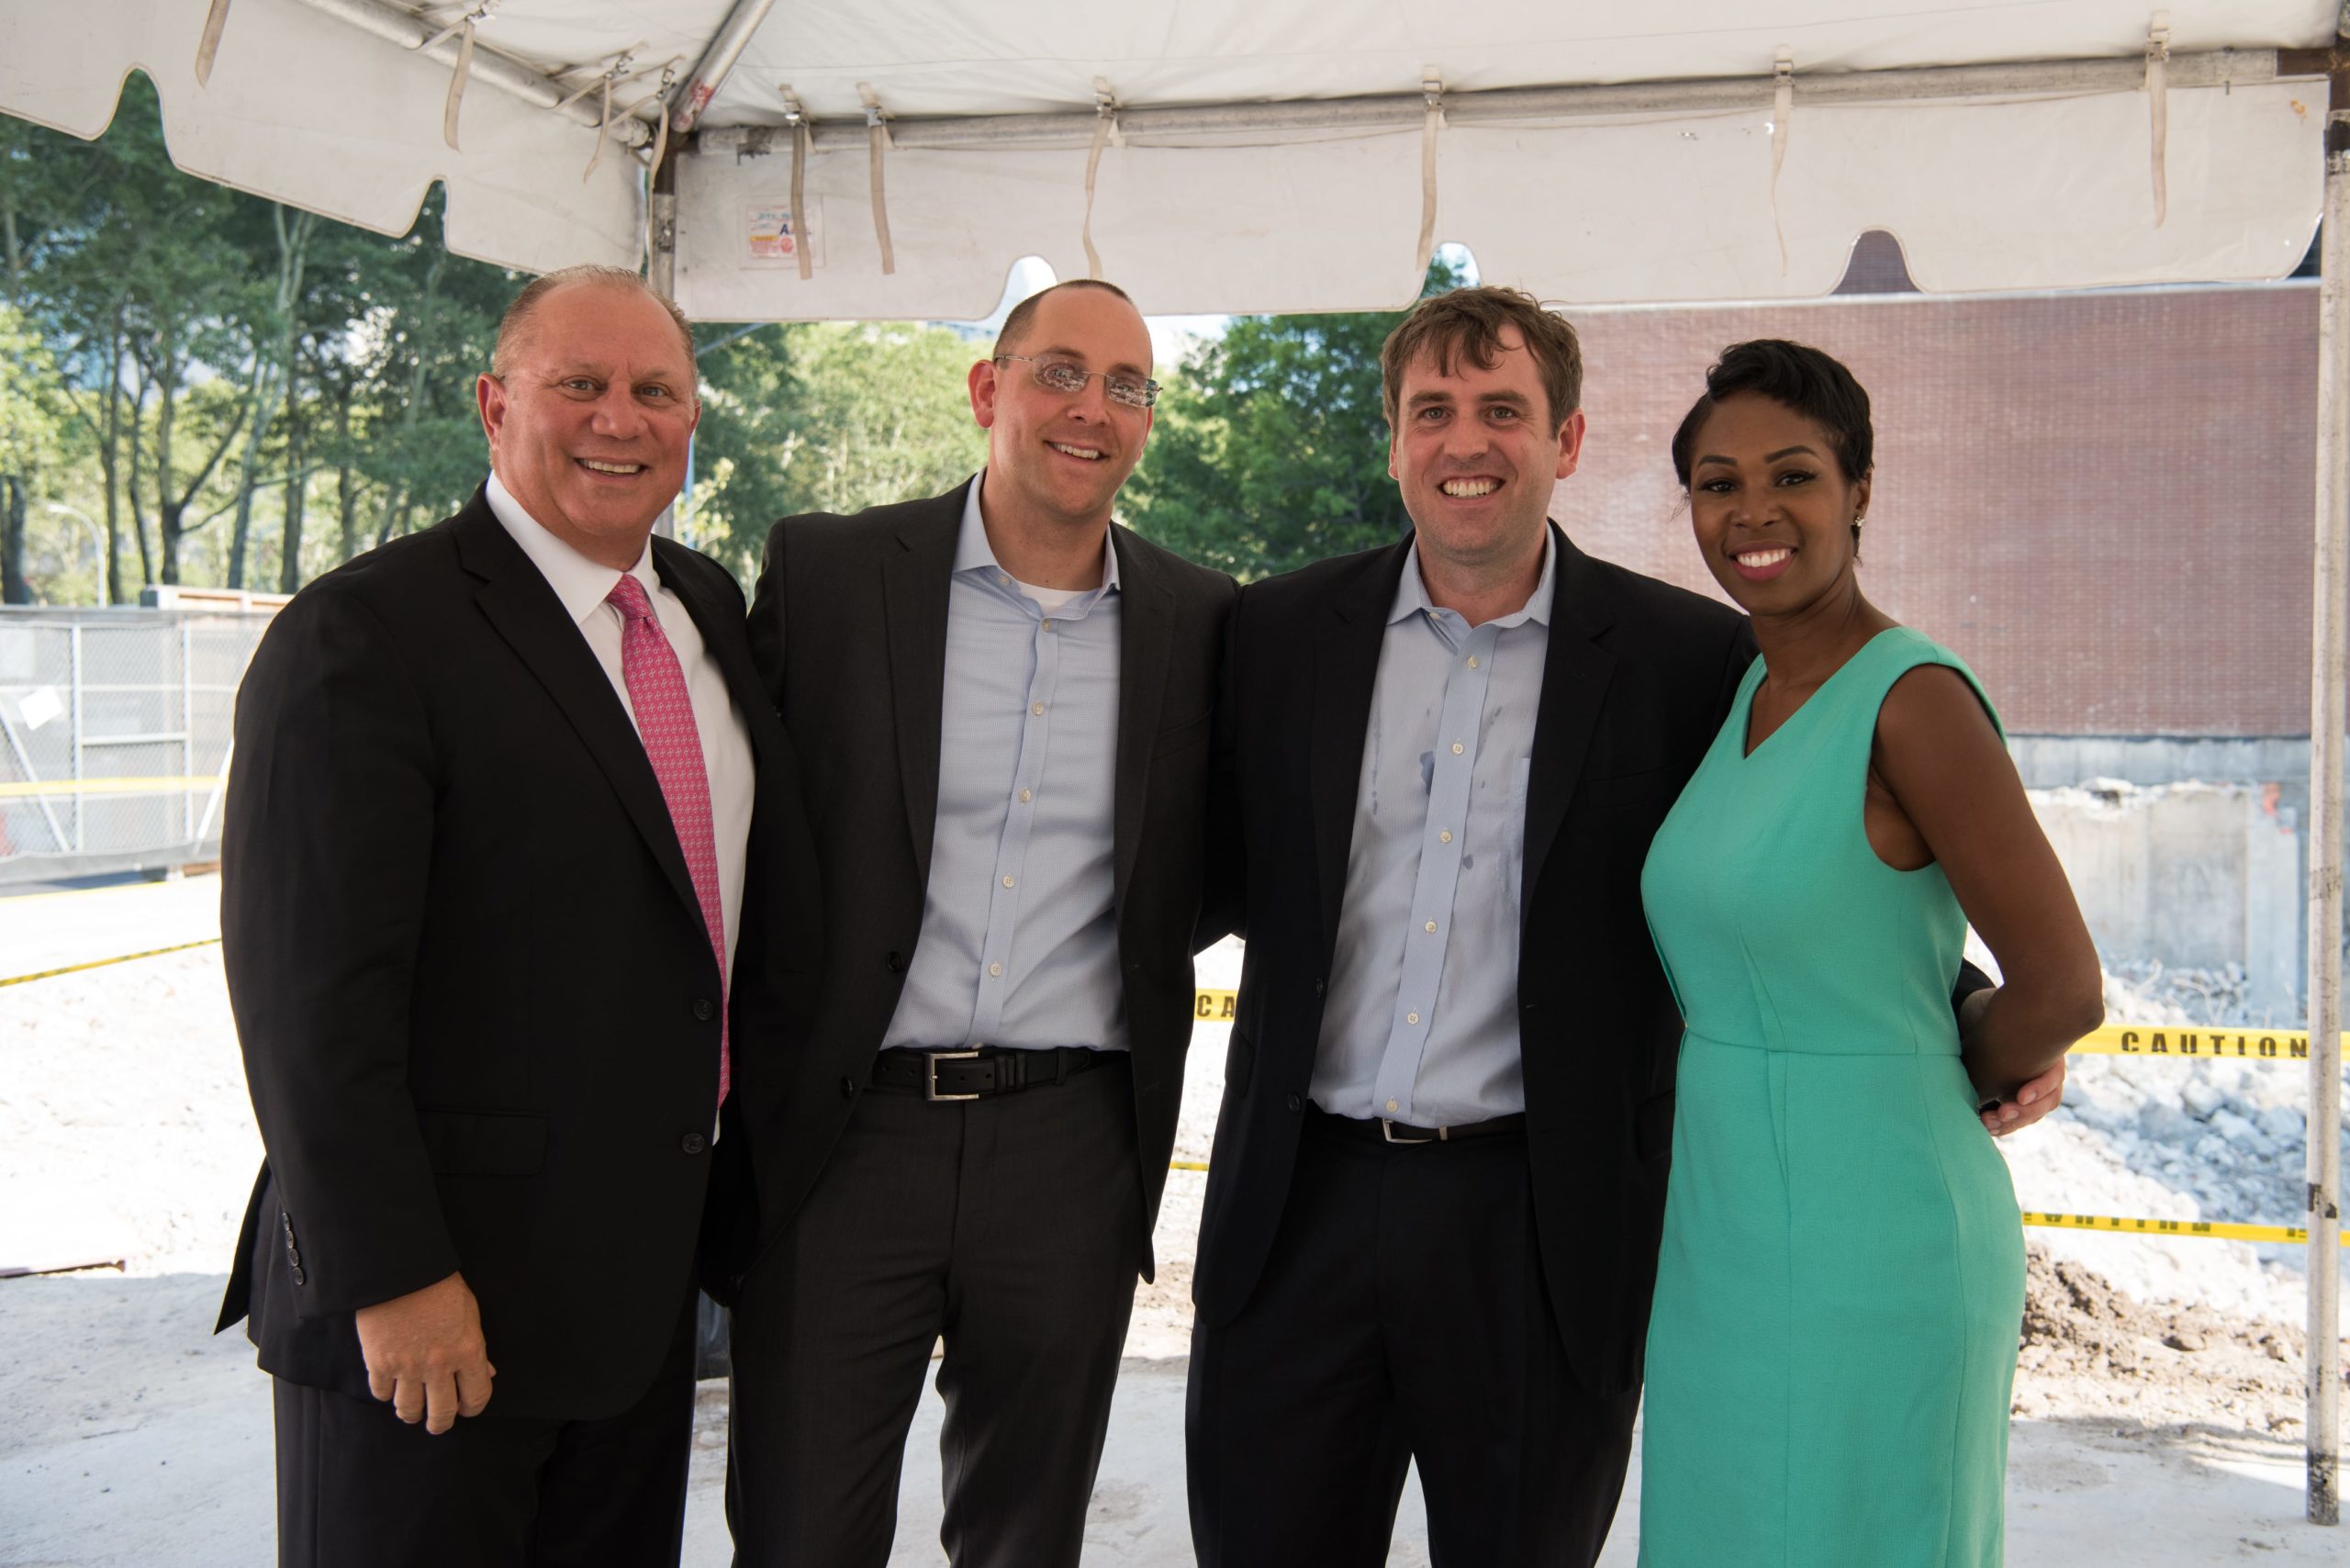 Photo of R&E attorneys Eric S. Orenstein & John B. Acierno along with client and the developer at the One Clinton ground